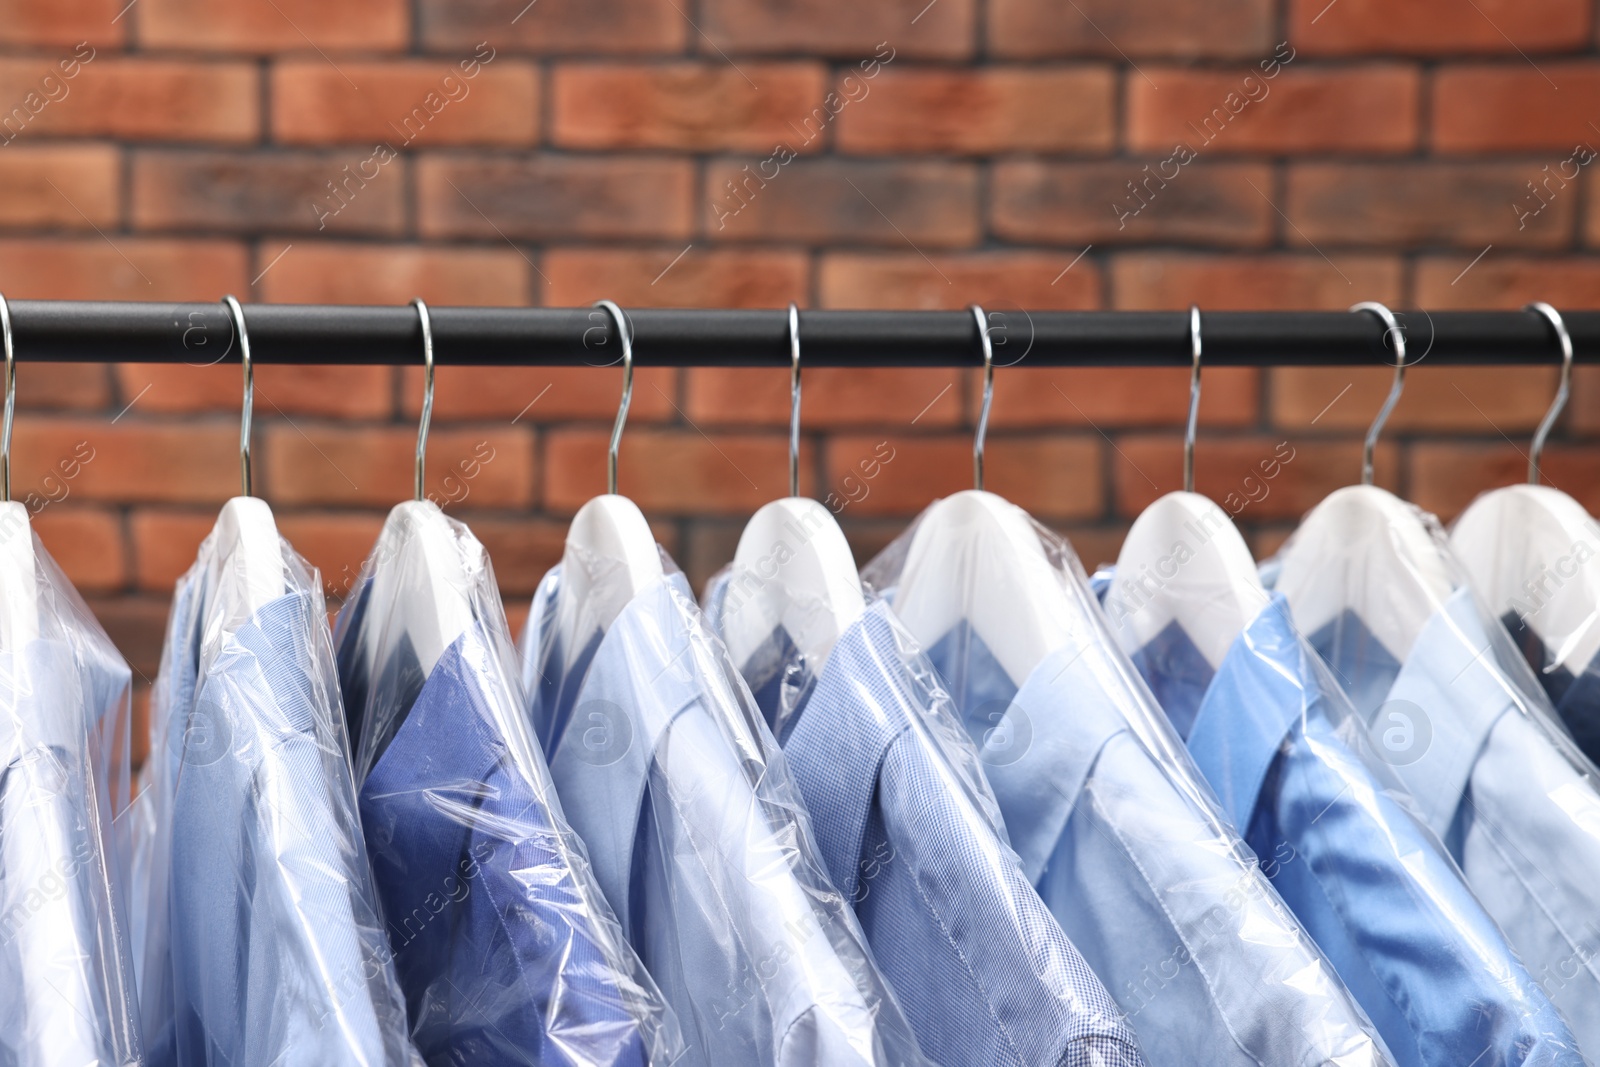 Photo of Dry-cleaning service. Many different clothes hanging on rack against brick wall, closeup